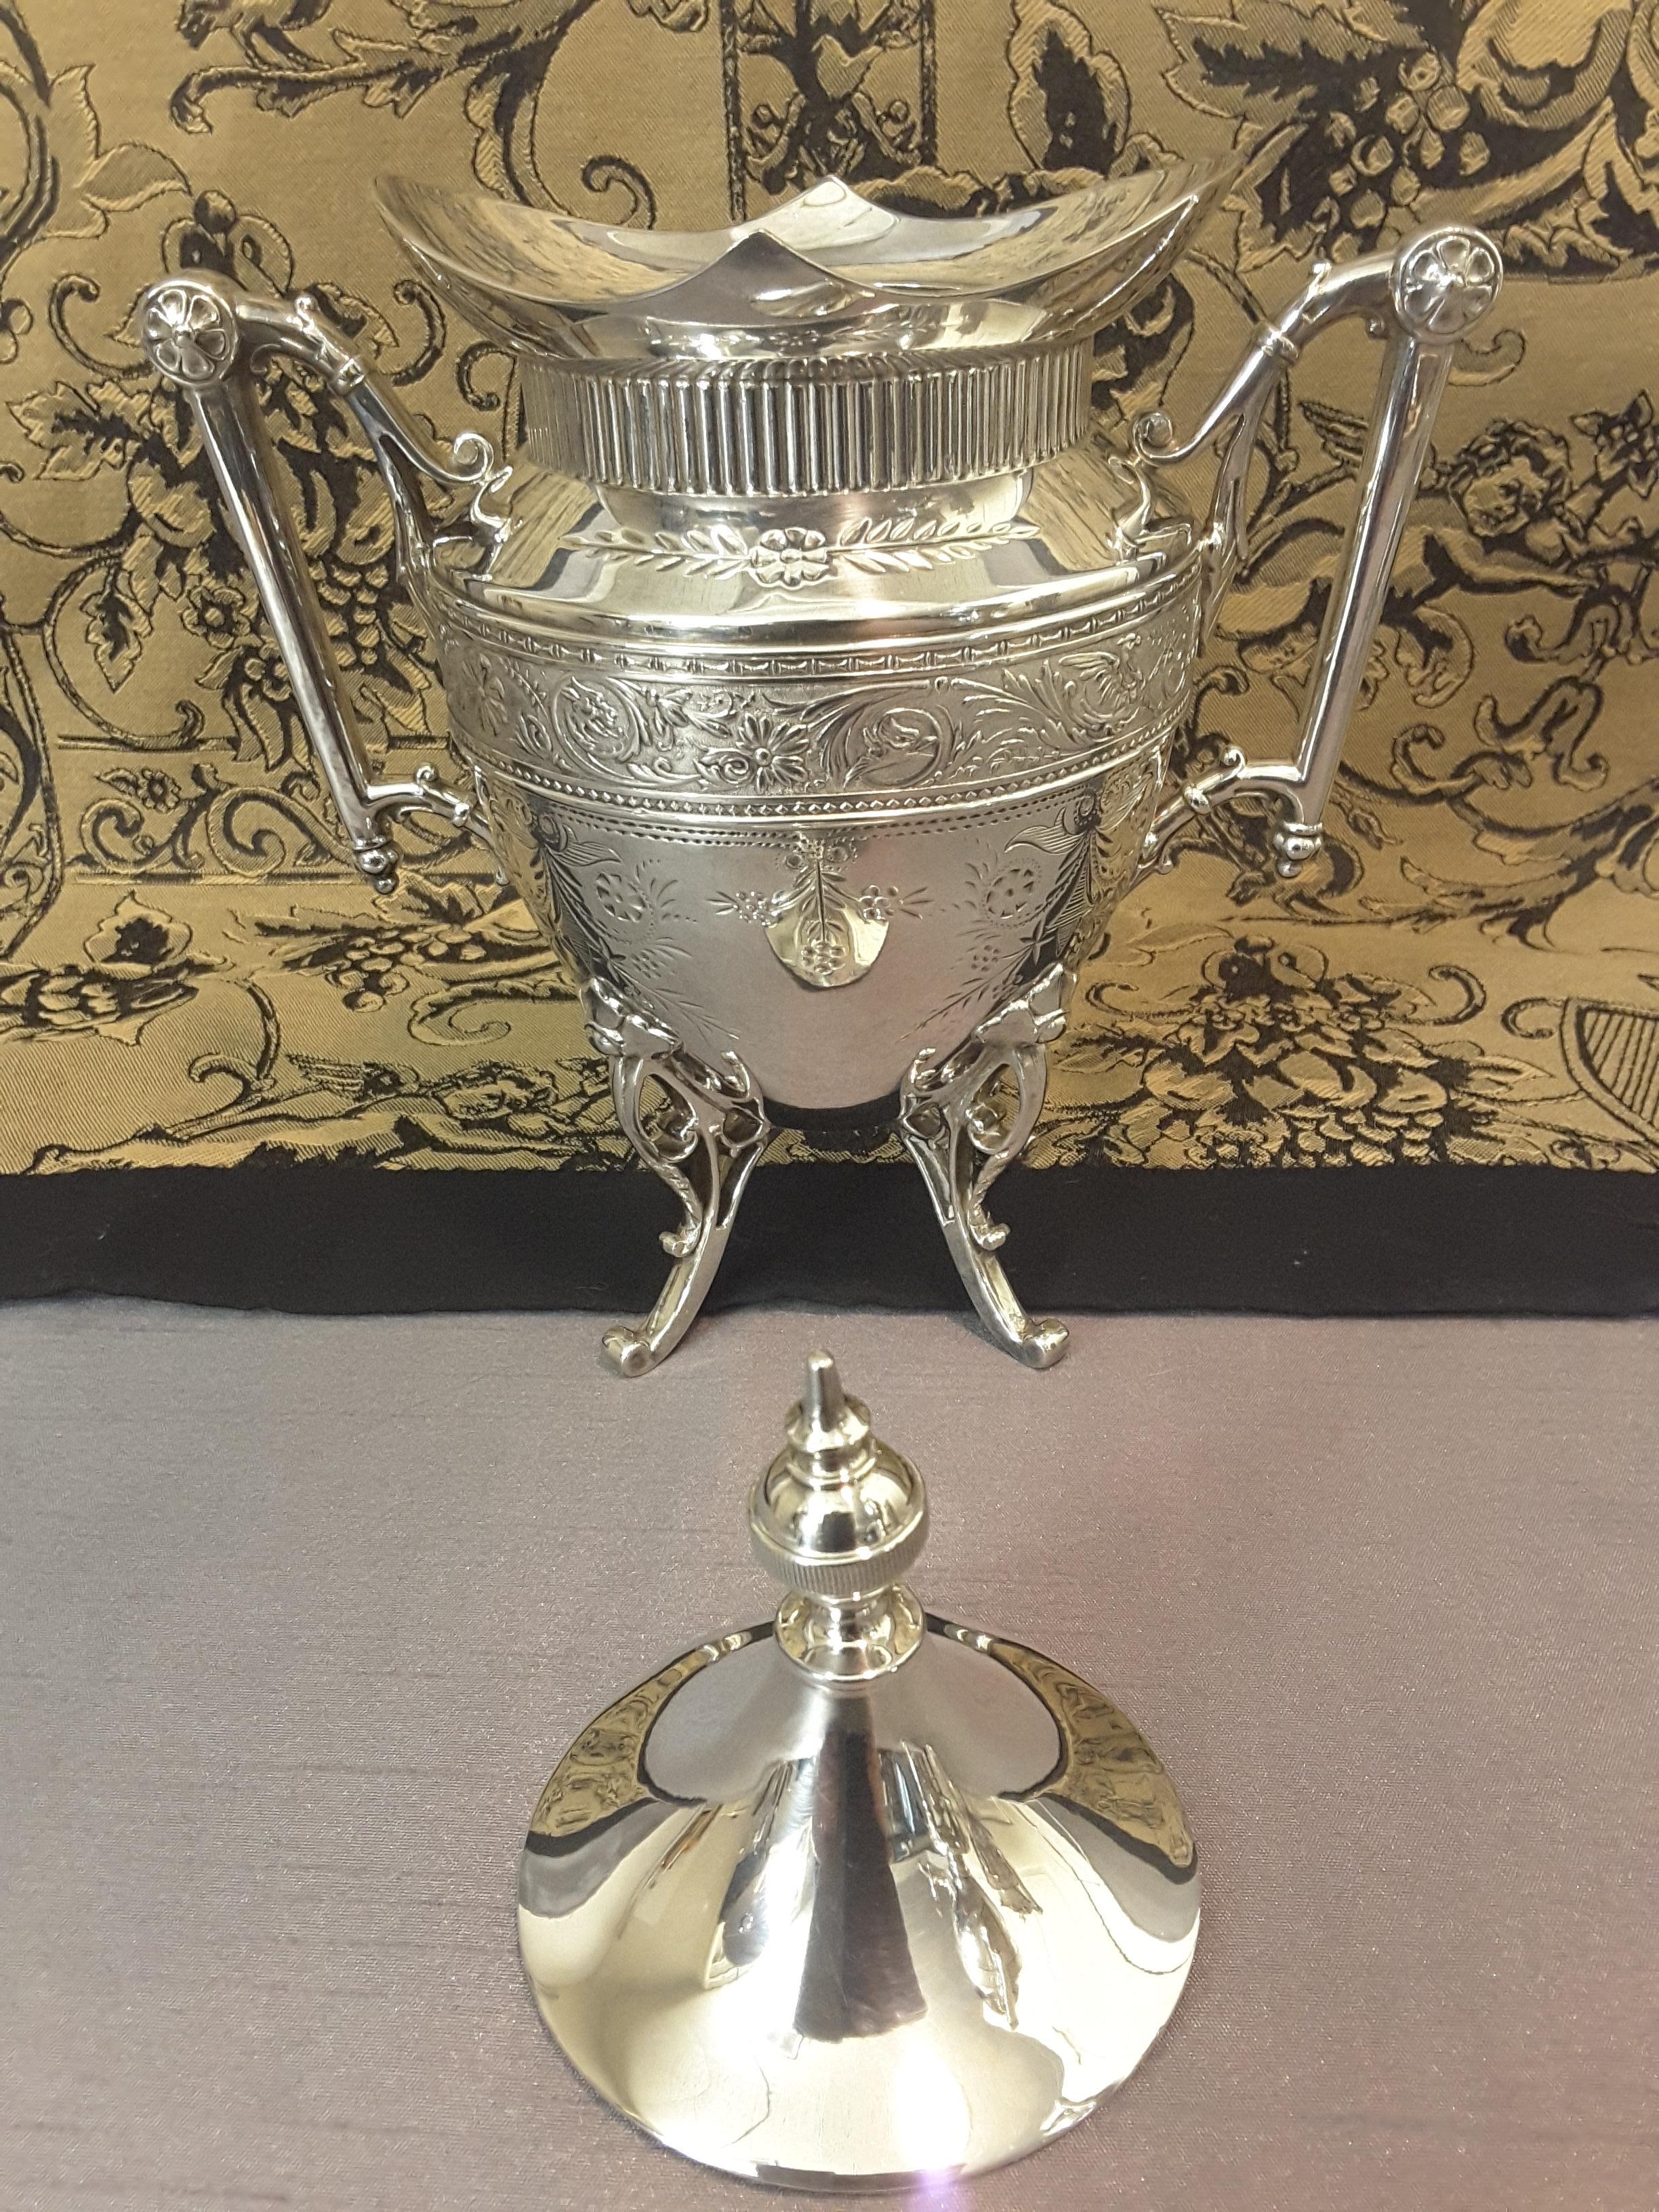 Exquisite Aesthetic Movement Silverplated Tea Service by Simpson, Hall & Miller For Sale 3